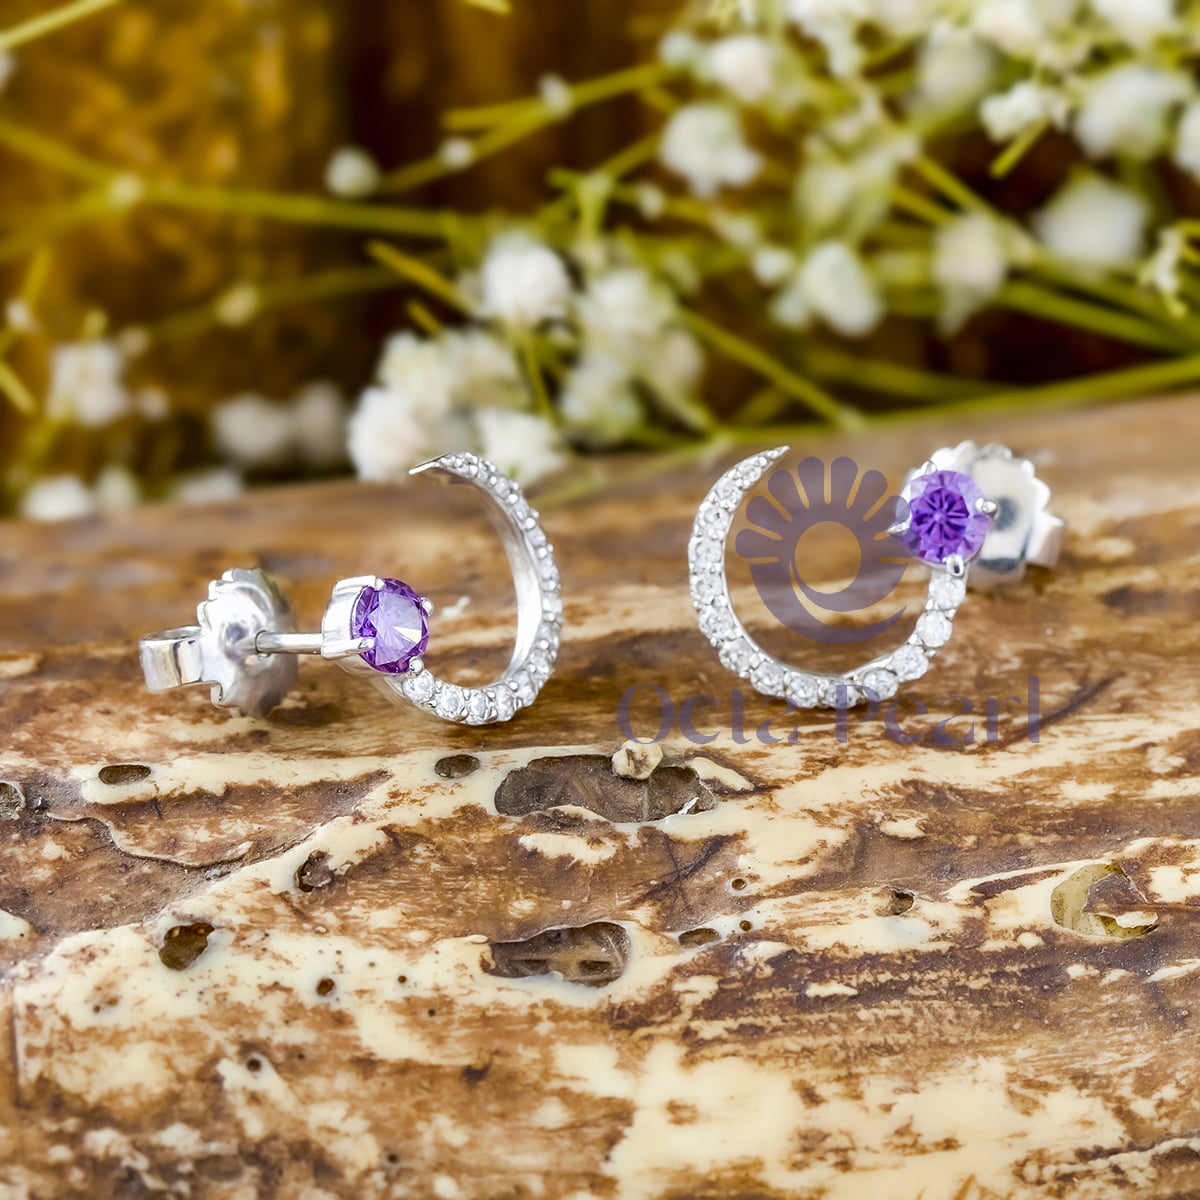 Round Cut Purple CZ Stone Half Moon Design Push Back Stud Earrings For Mother's Day Gift